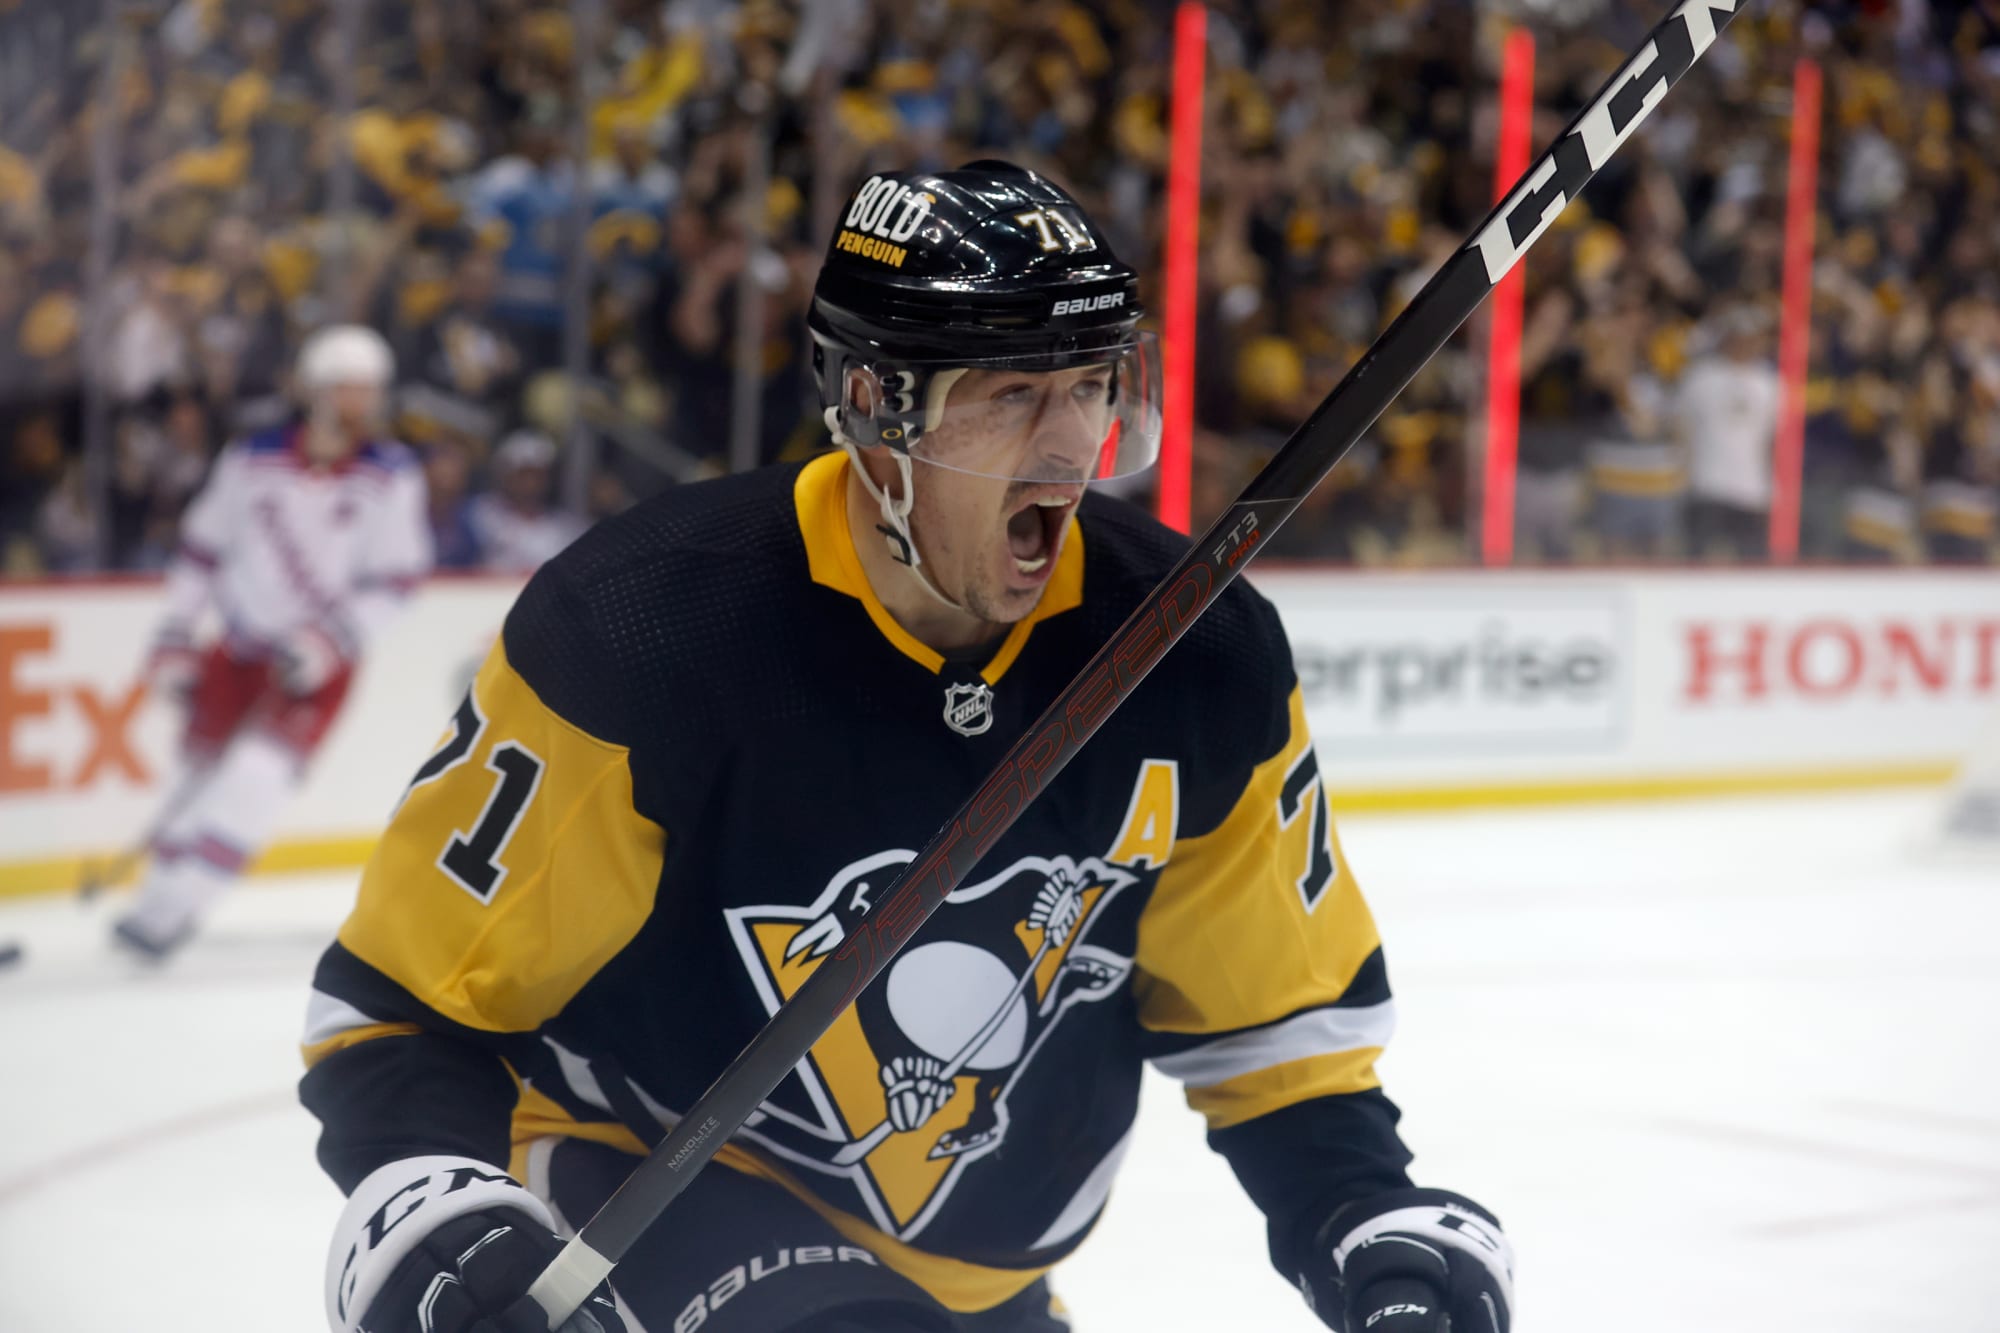 Penguins: Evgeni Malkin’s days in Pittsburgh are numbered